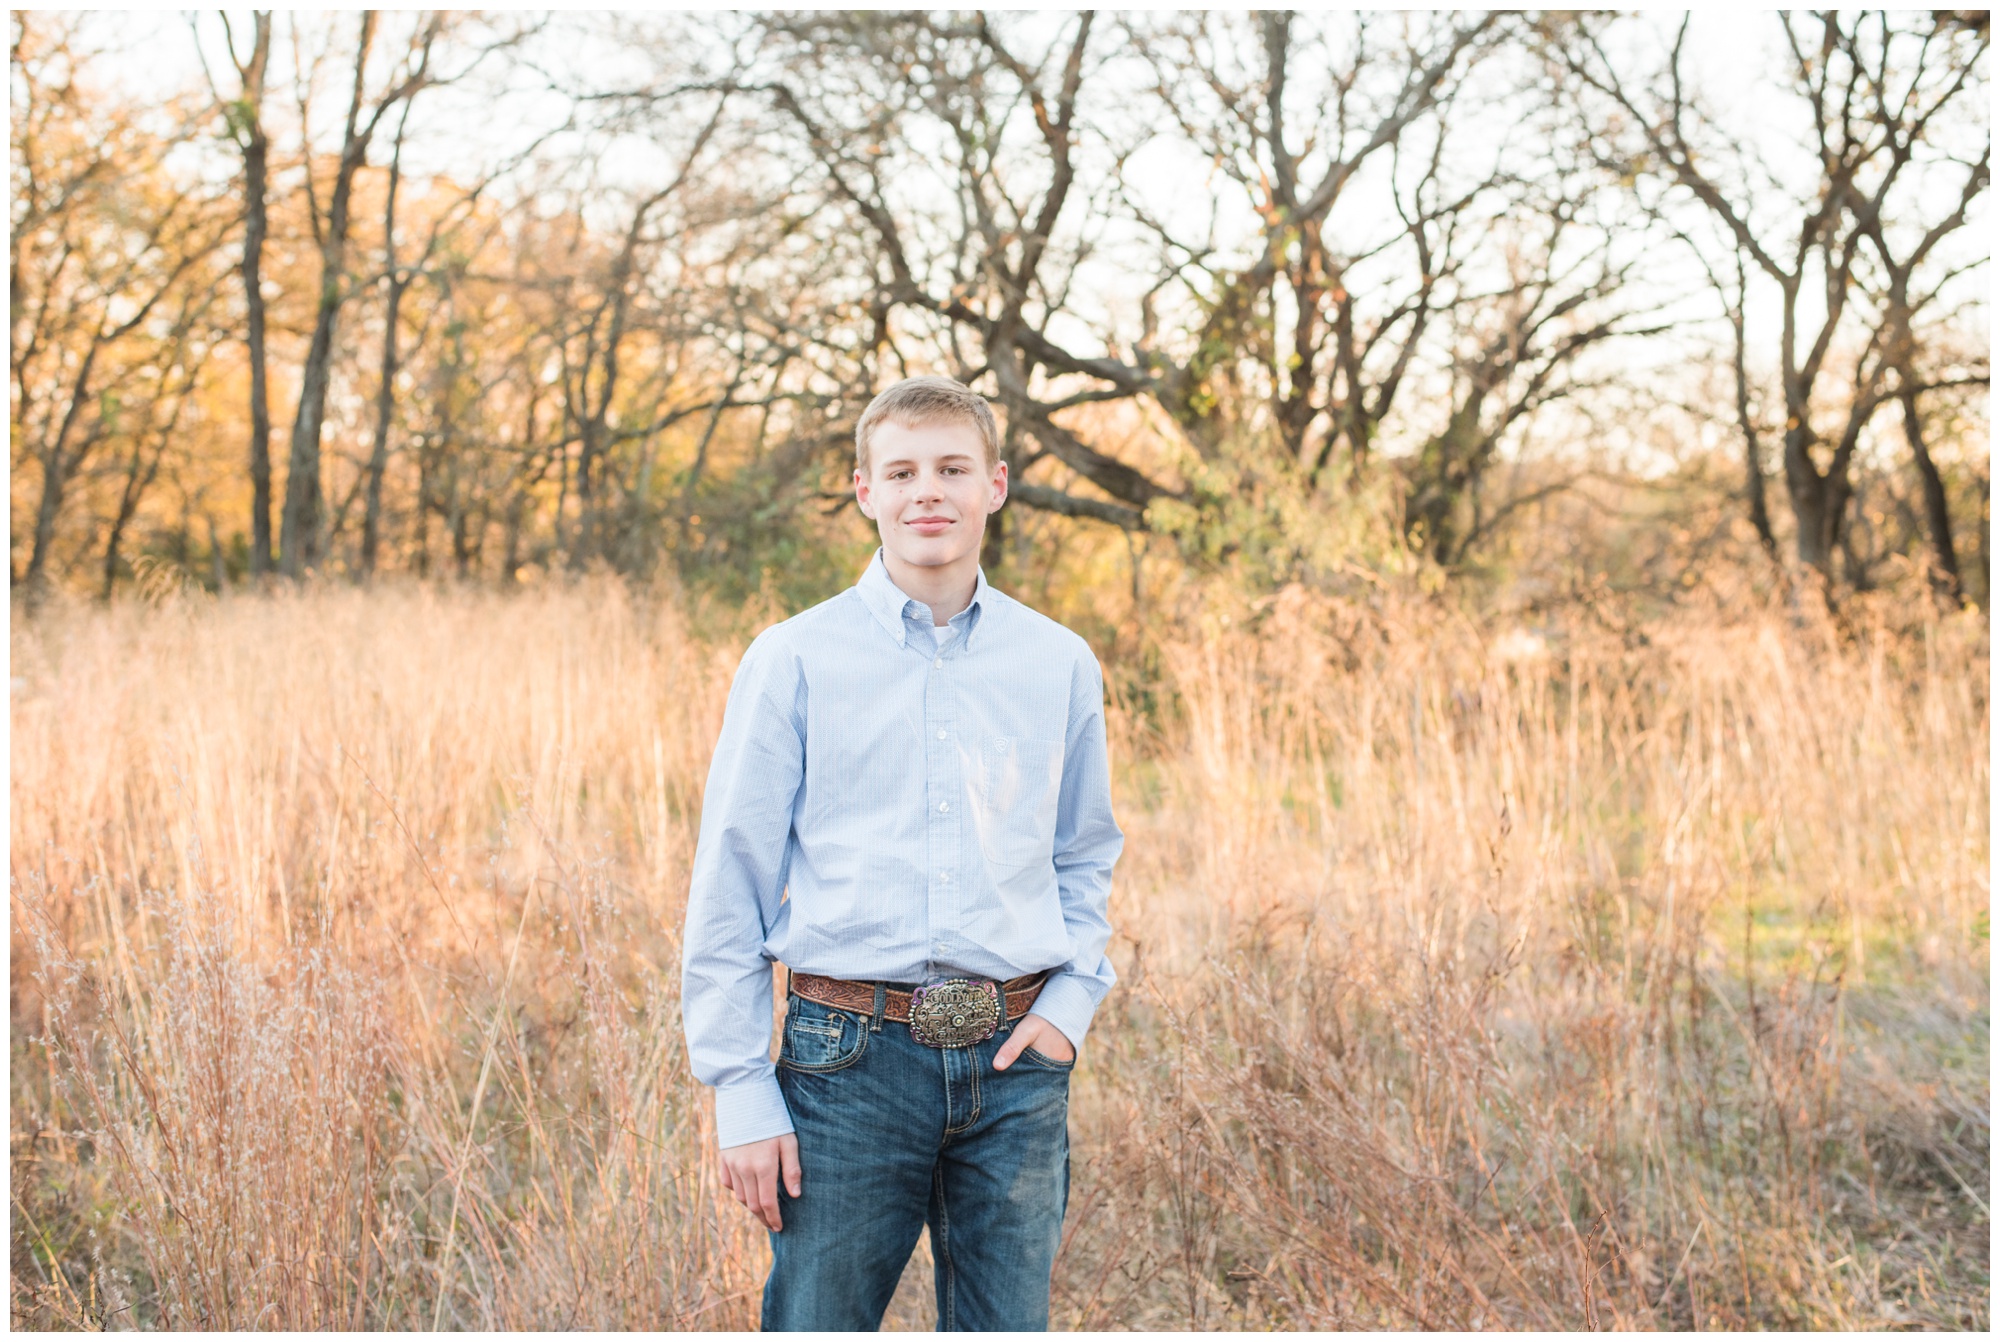 Elmer W Oliver Nature Park | Mansfield, Texas | Mansfield Family Session | Fort Worth Family Photographer | Lauren Grimes Photography